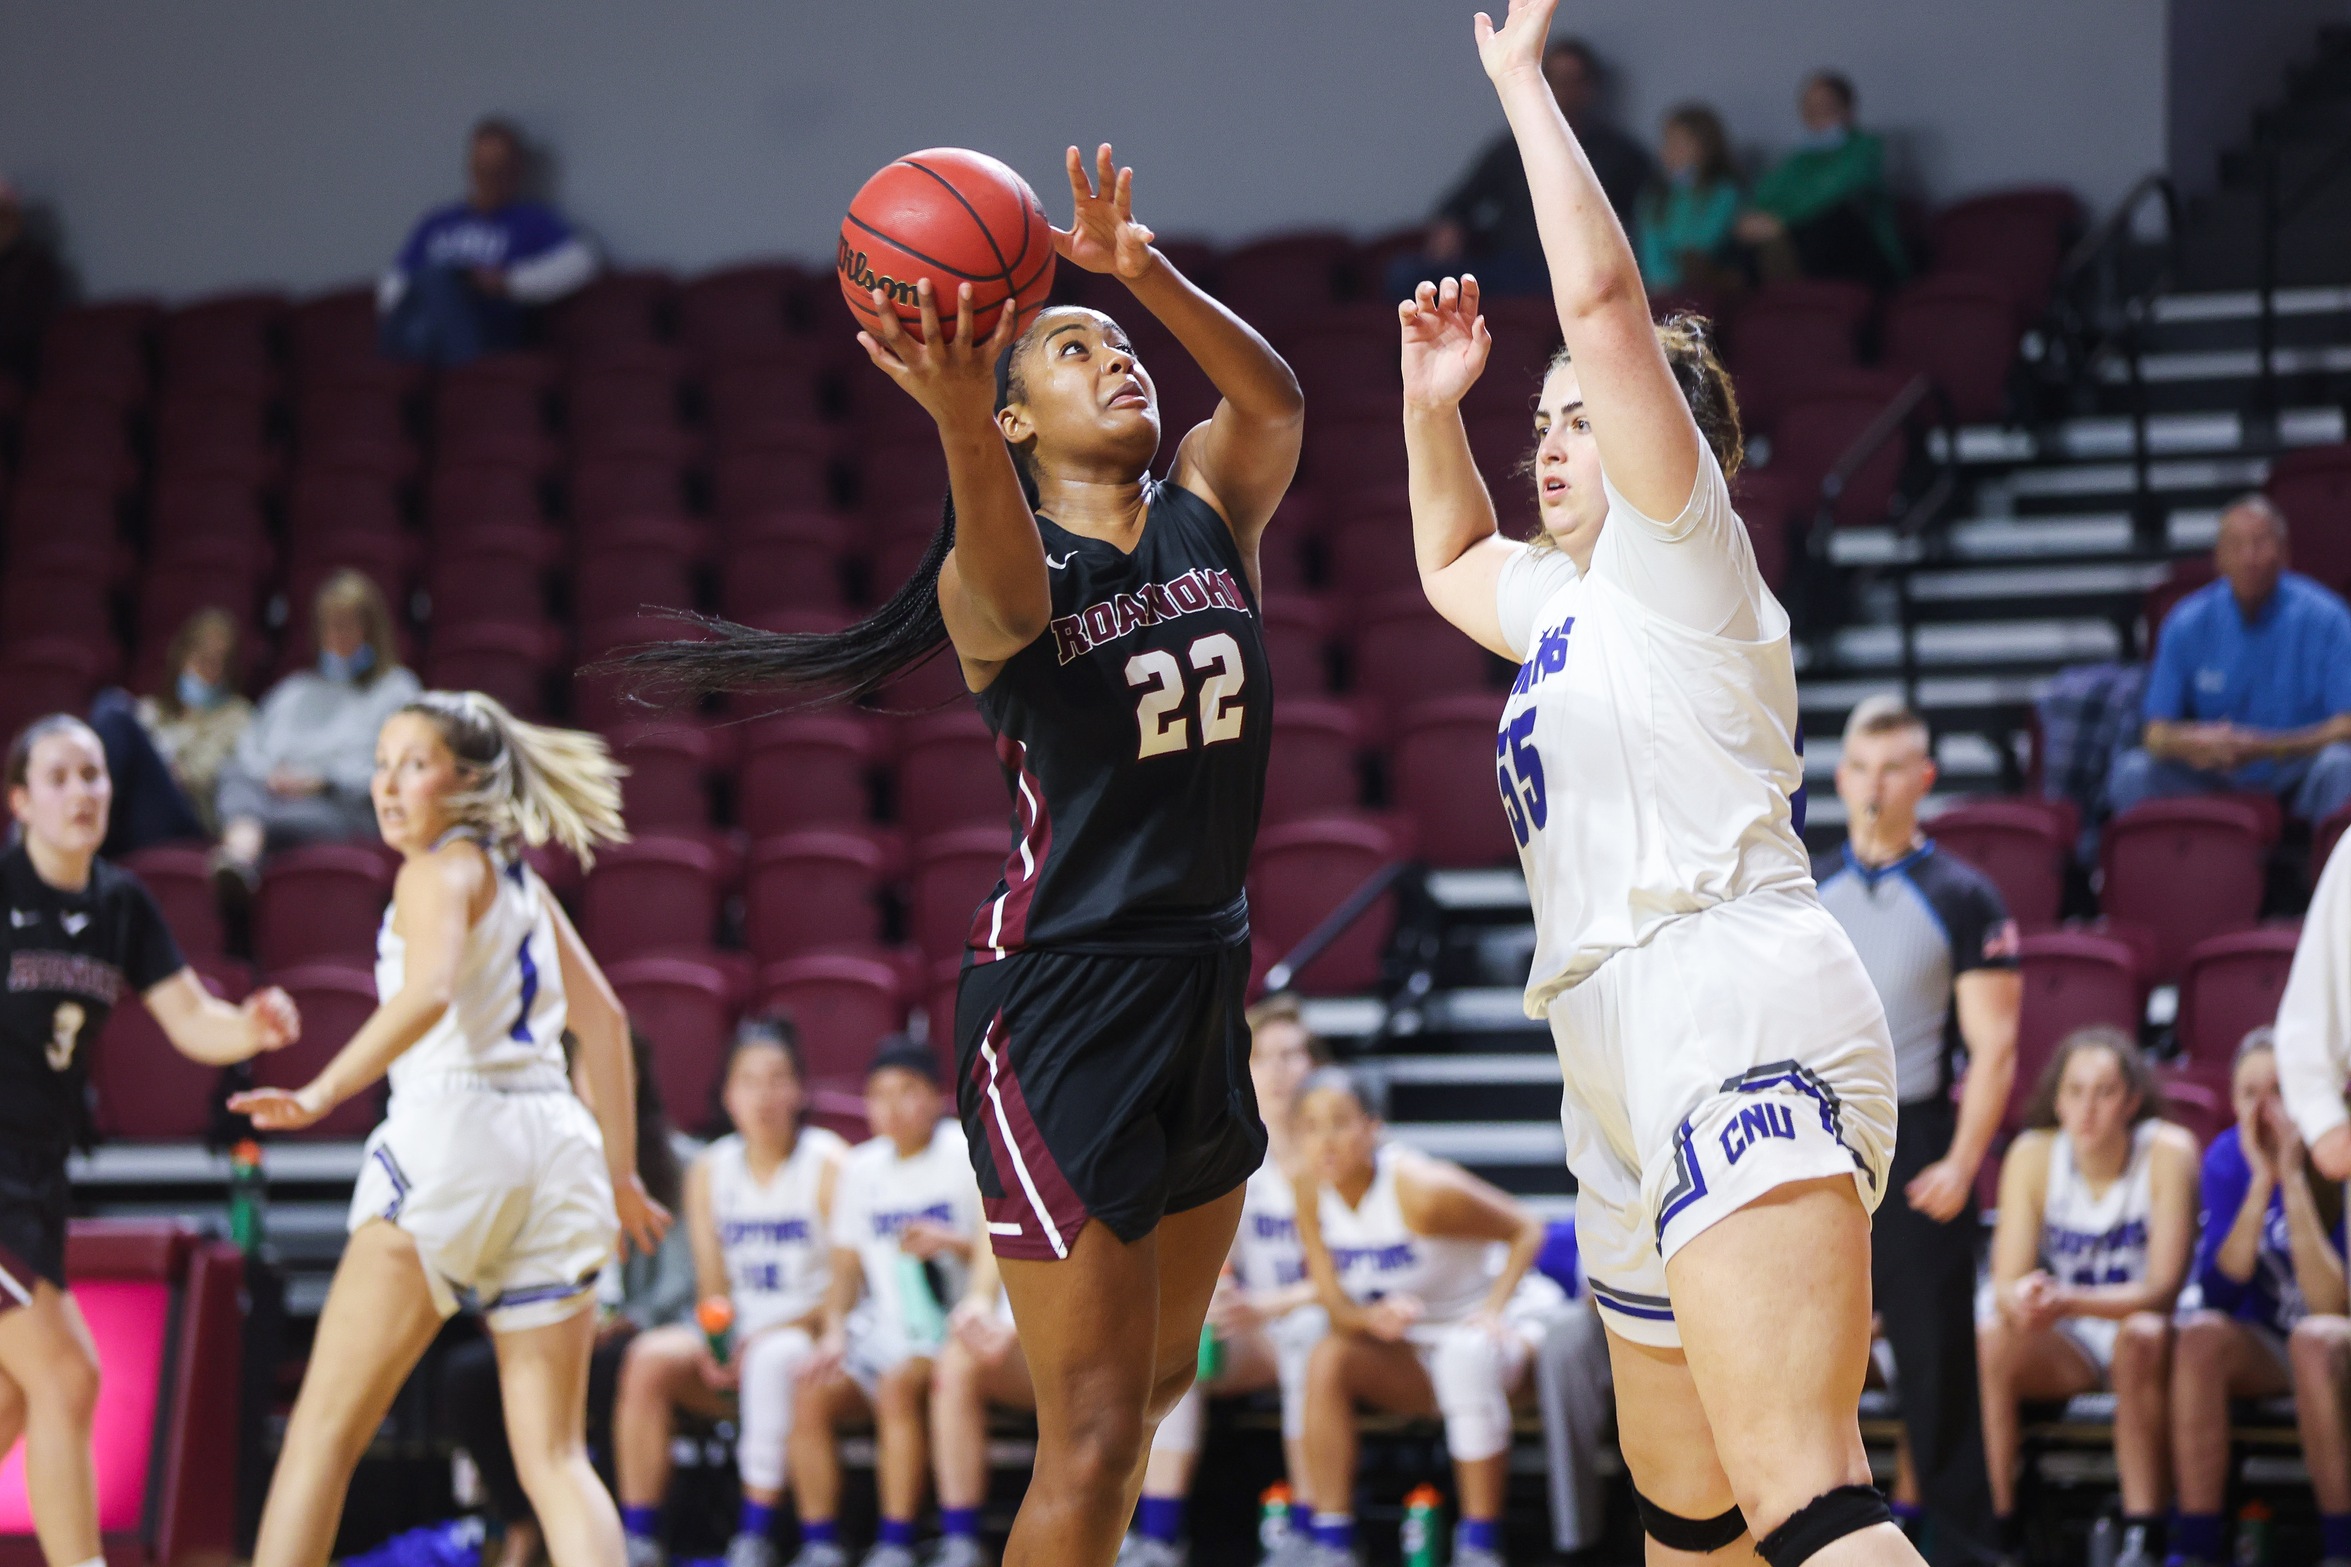 Maroons Open Season With 96-58 Win Over Mary Baldwin on the Road